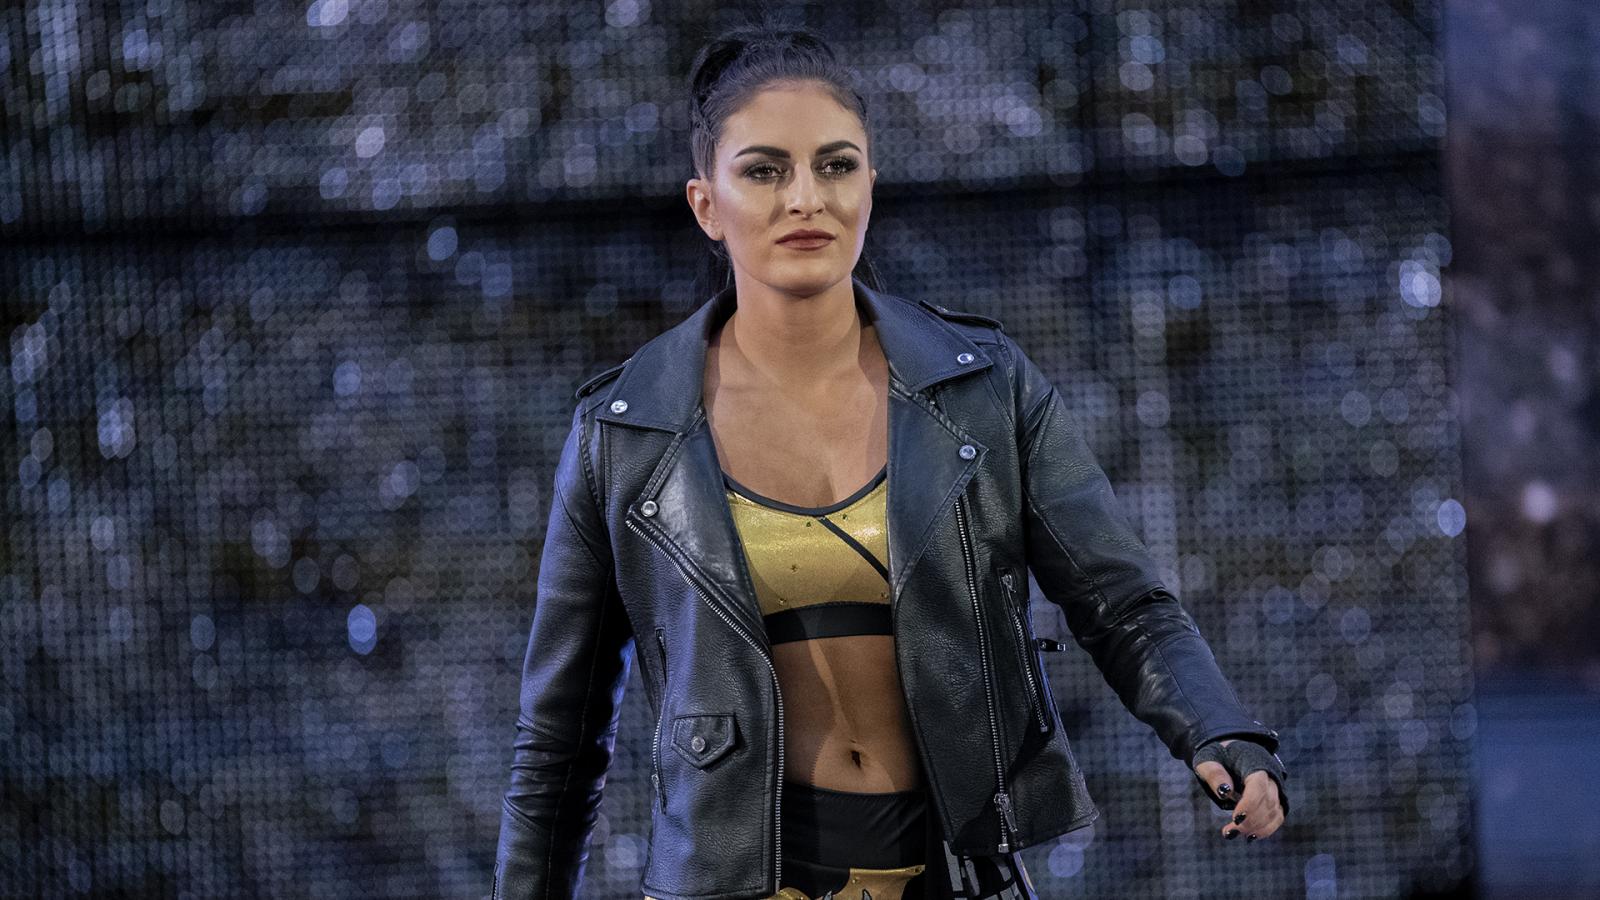 Update on Sonya Deville’s possible return to the ring